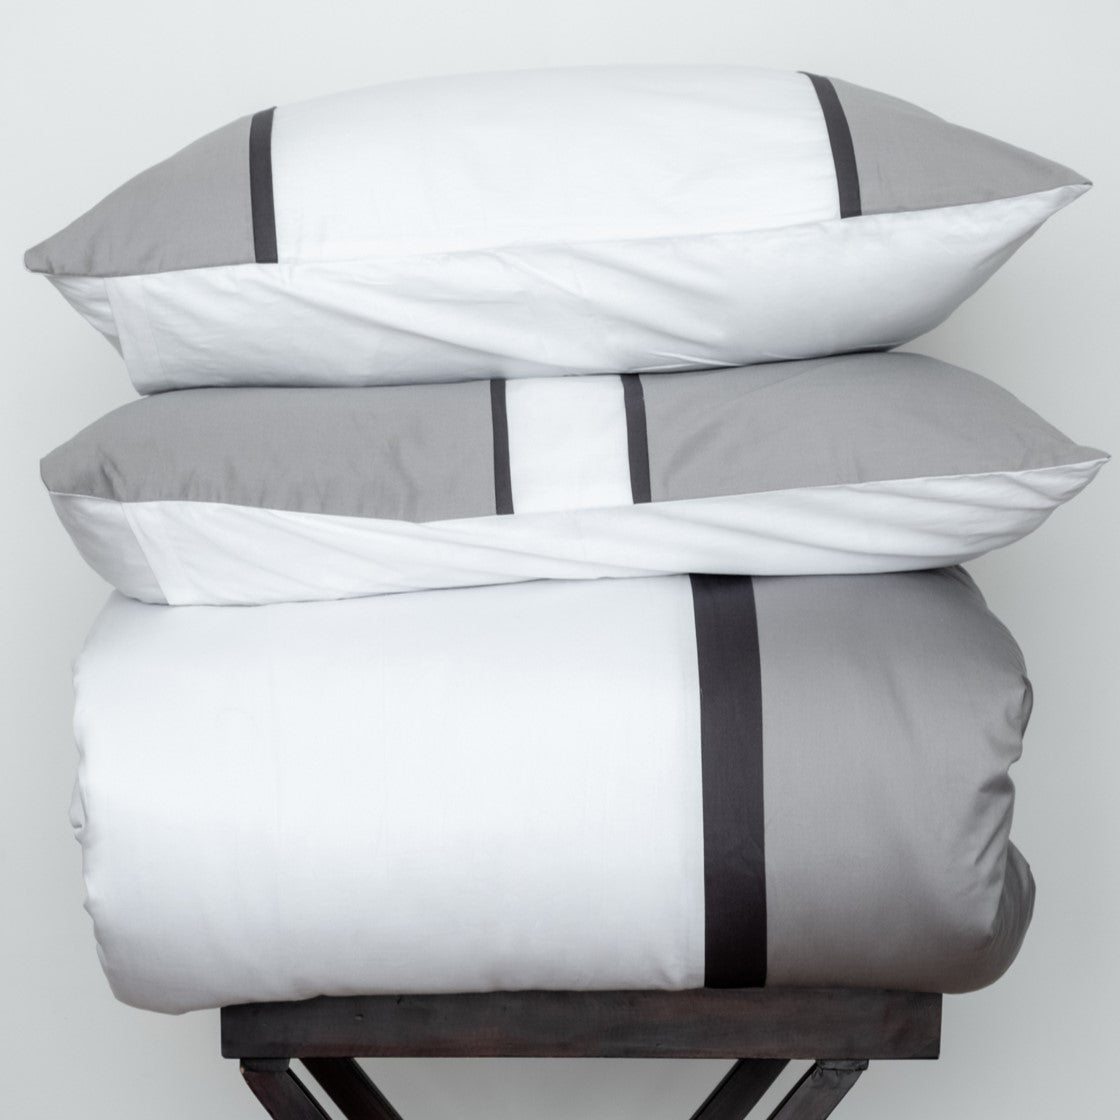 Extra Pillow Case for Hotel Series Type B